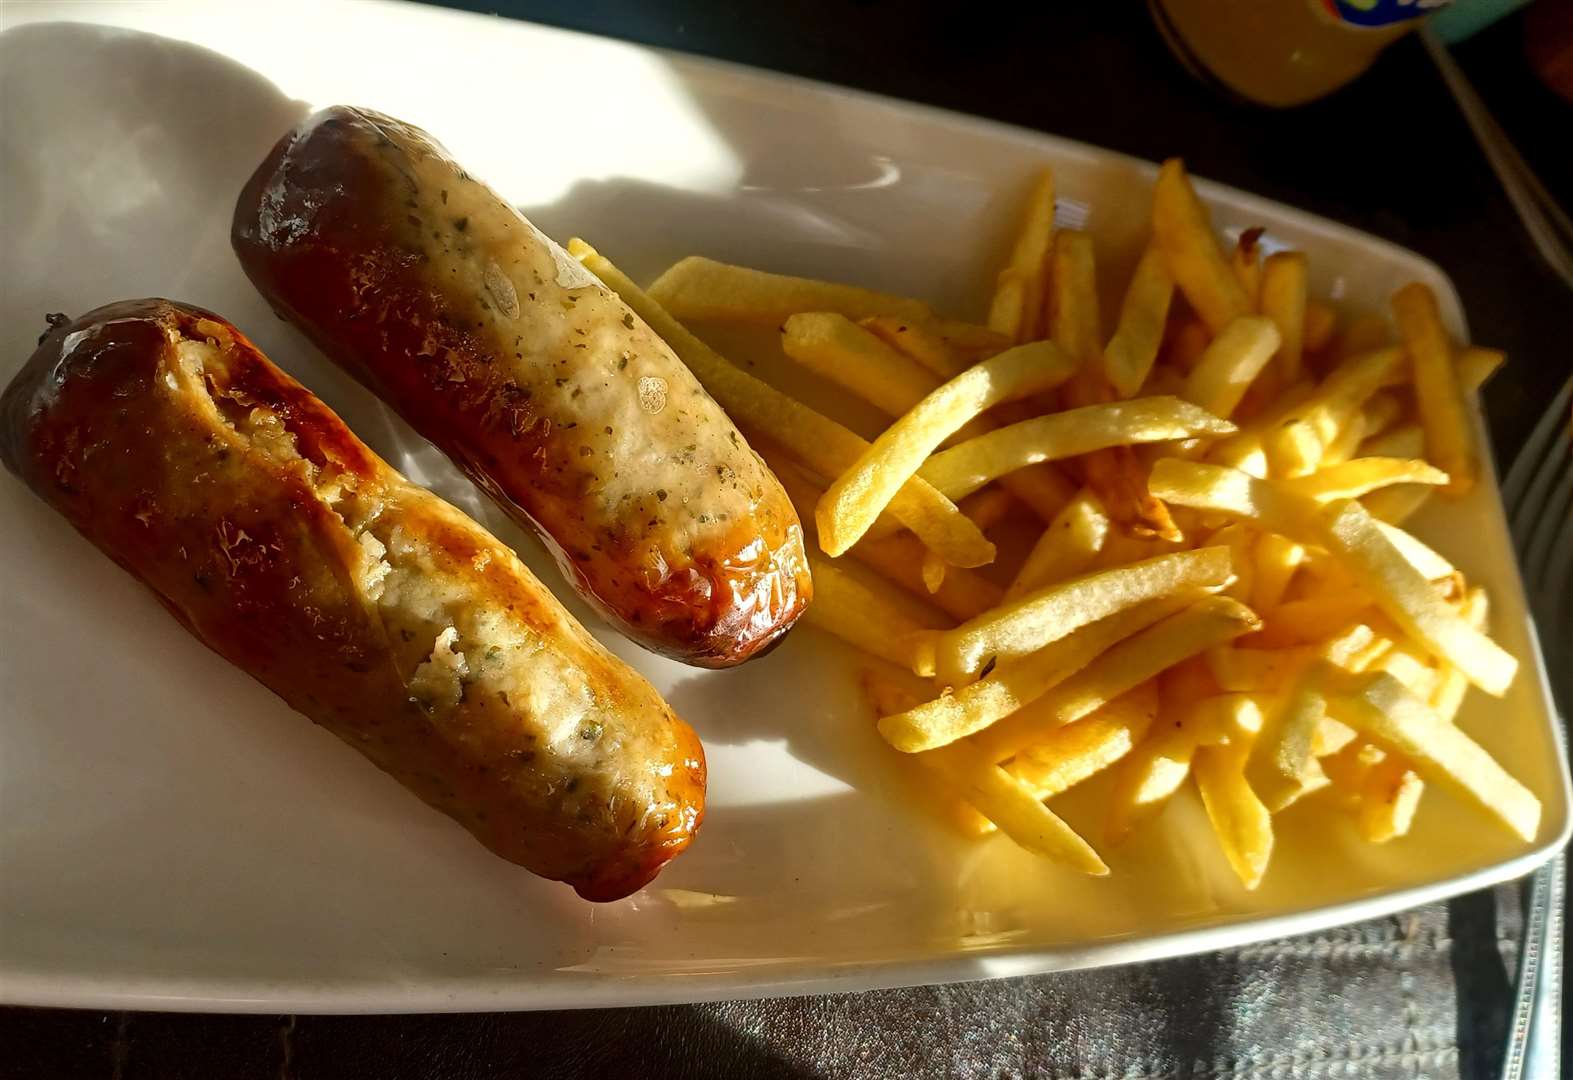 Sausage and chips on the children’s menu